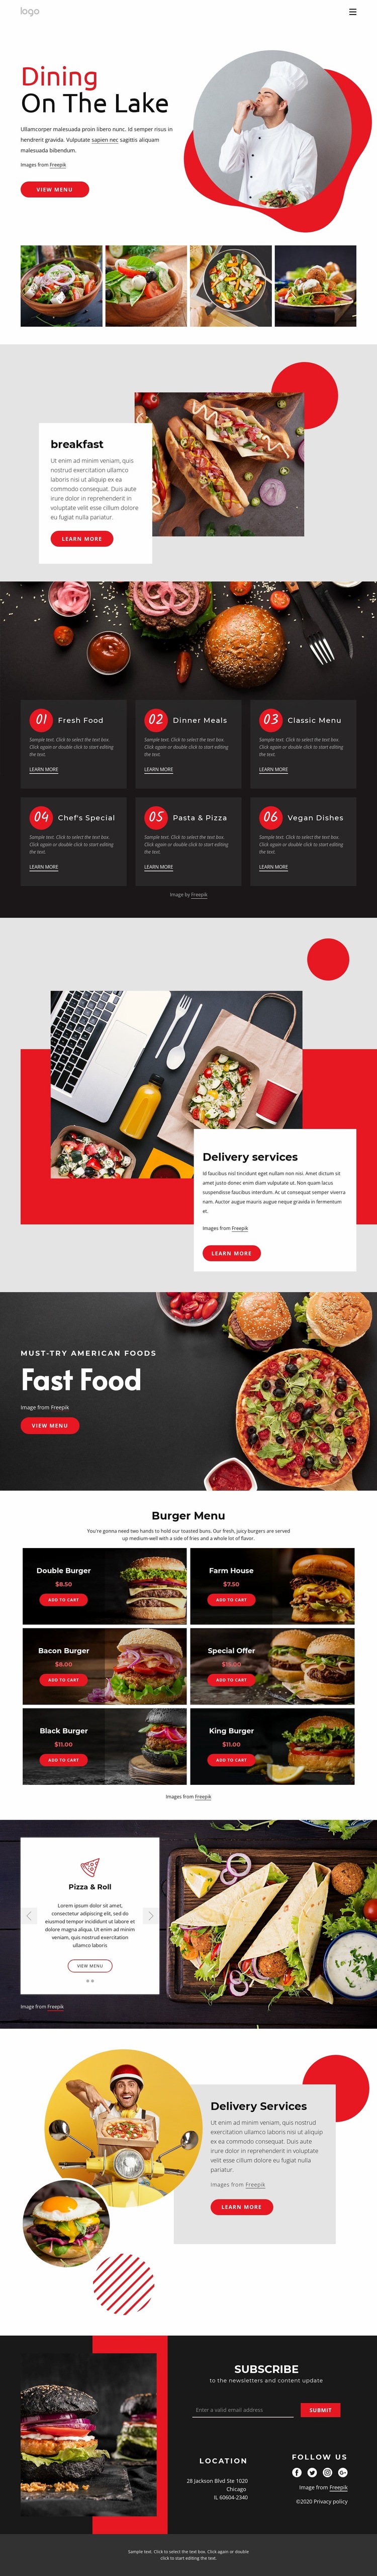 Dining on the lake Website Builder Templates